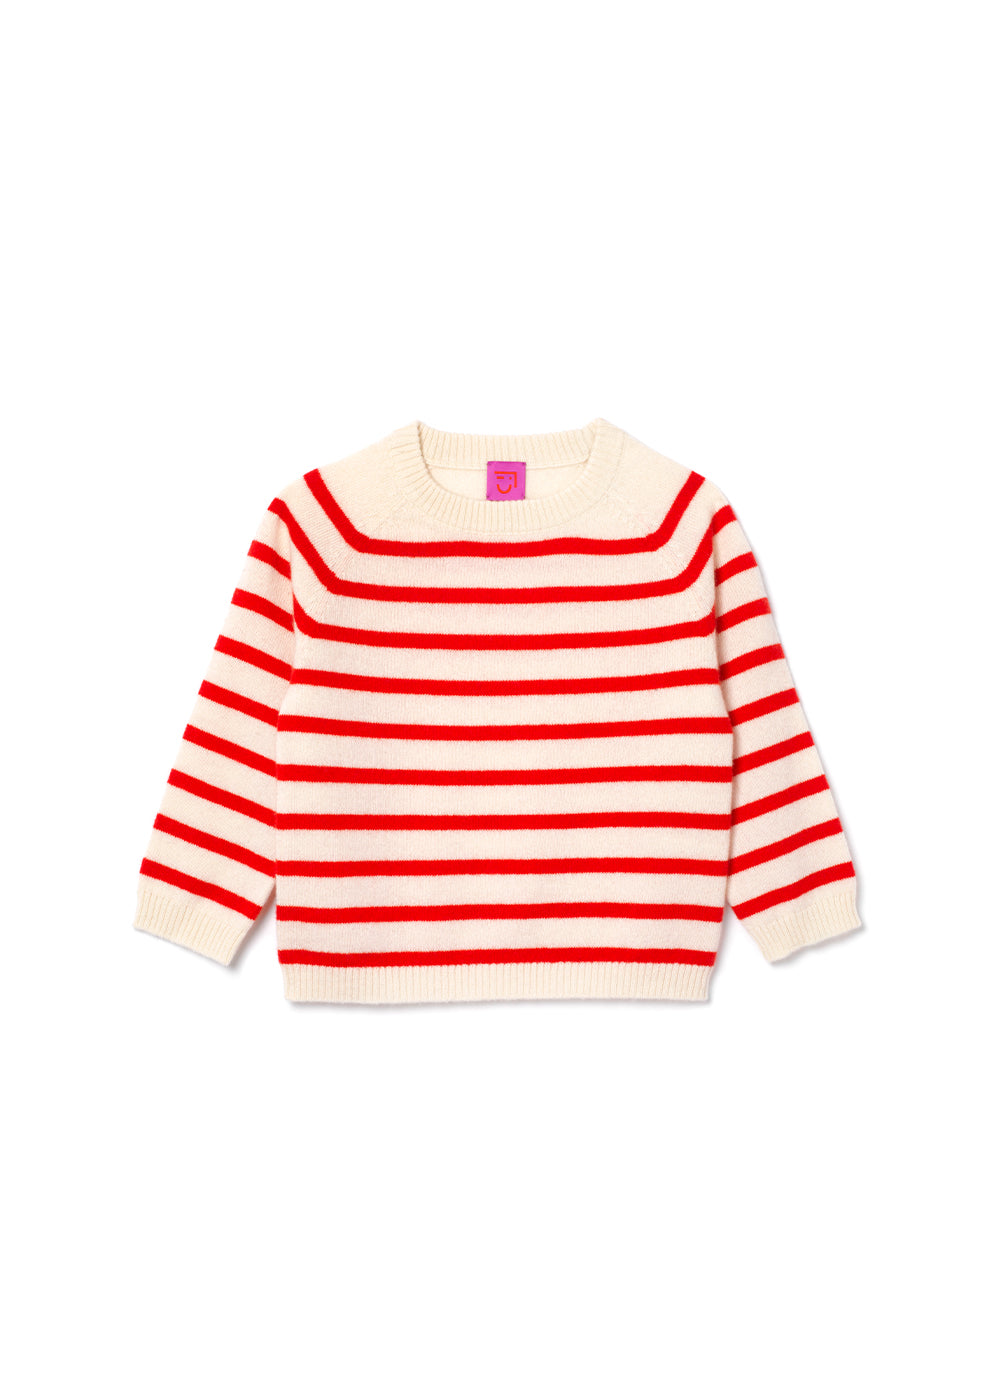 Maisy Striped Jumper - 4Y-6Y / Ivory/Rouge Red Stripes